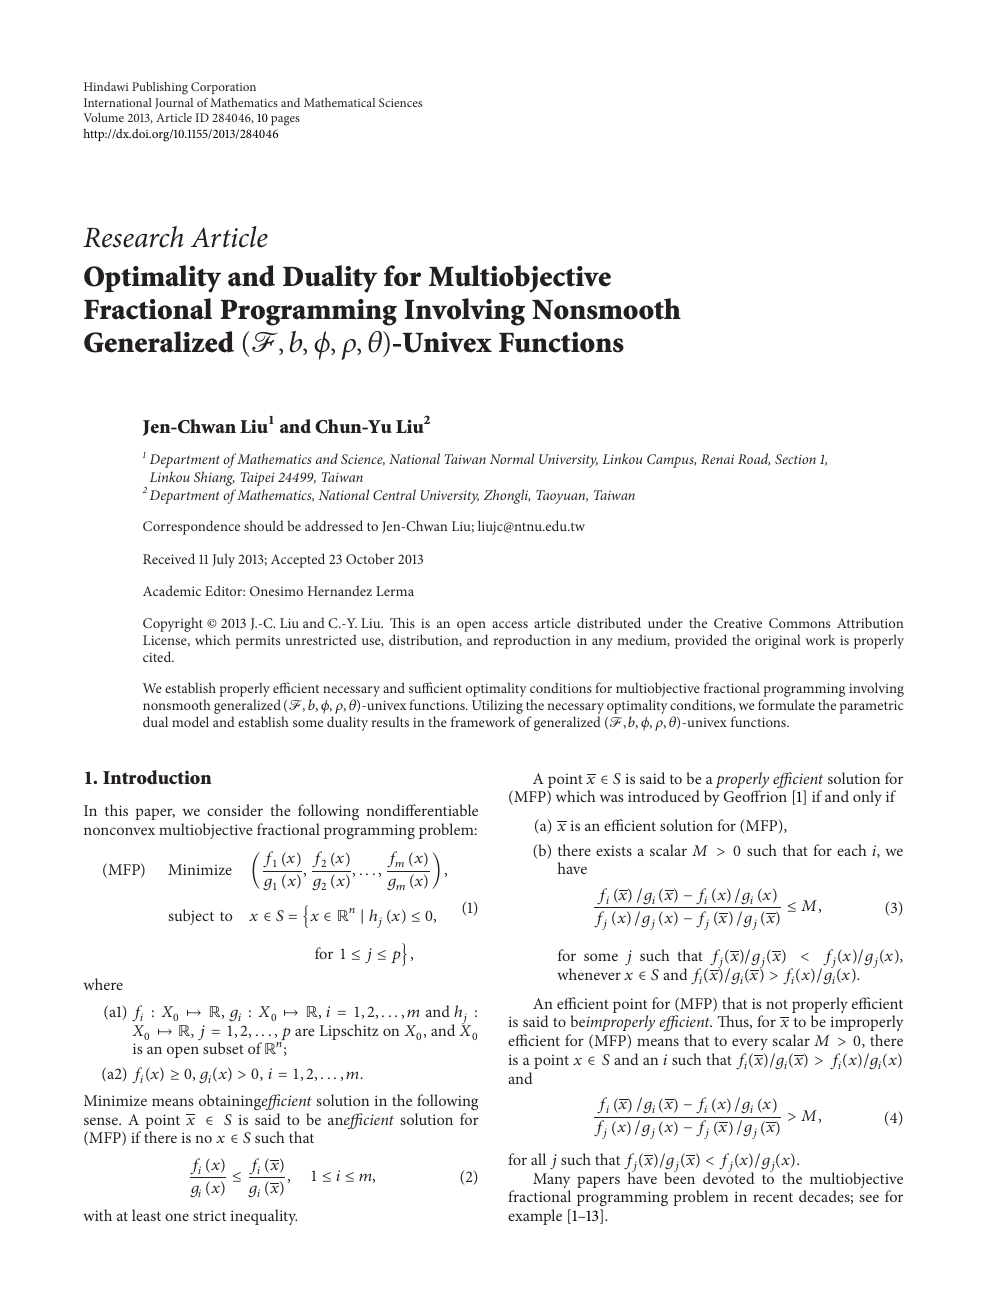 Optimality And Duality For Multiobjective Fractional Programming Involving Nonsmooth Generalized ℱ B ϕ R 8 Univex Functions Topic Of Research Paper In Mathematics Download Scholarly